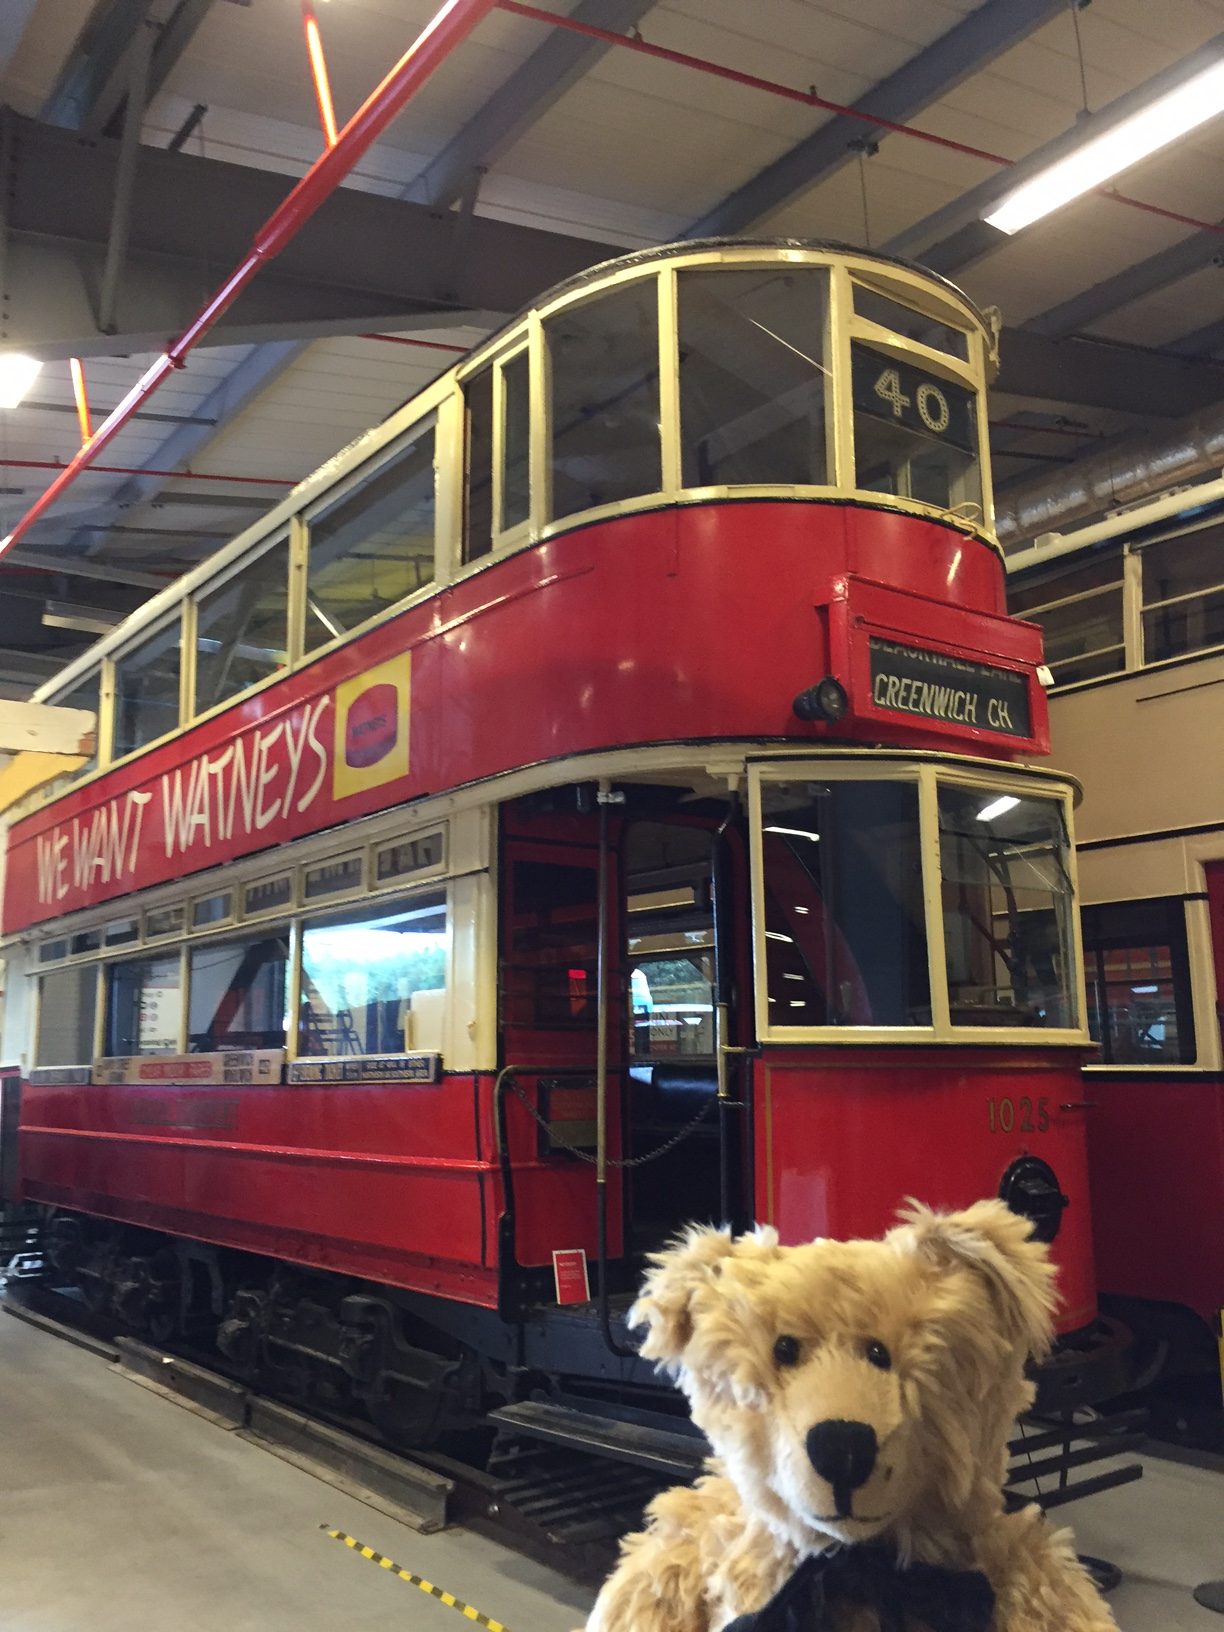 London Transport Museum: One of the last London Trams.